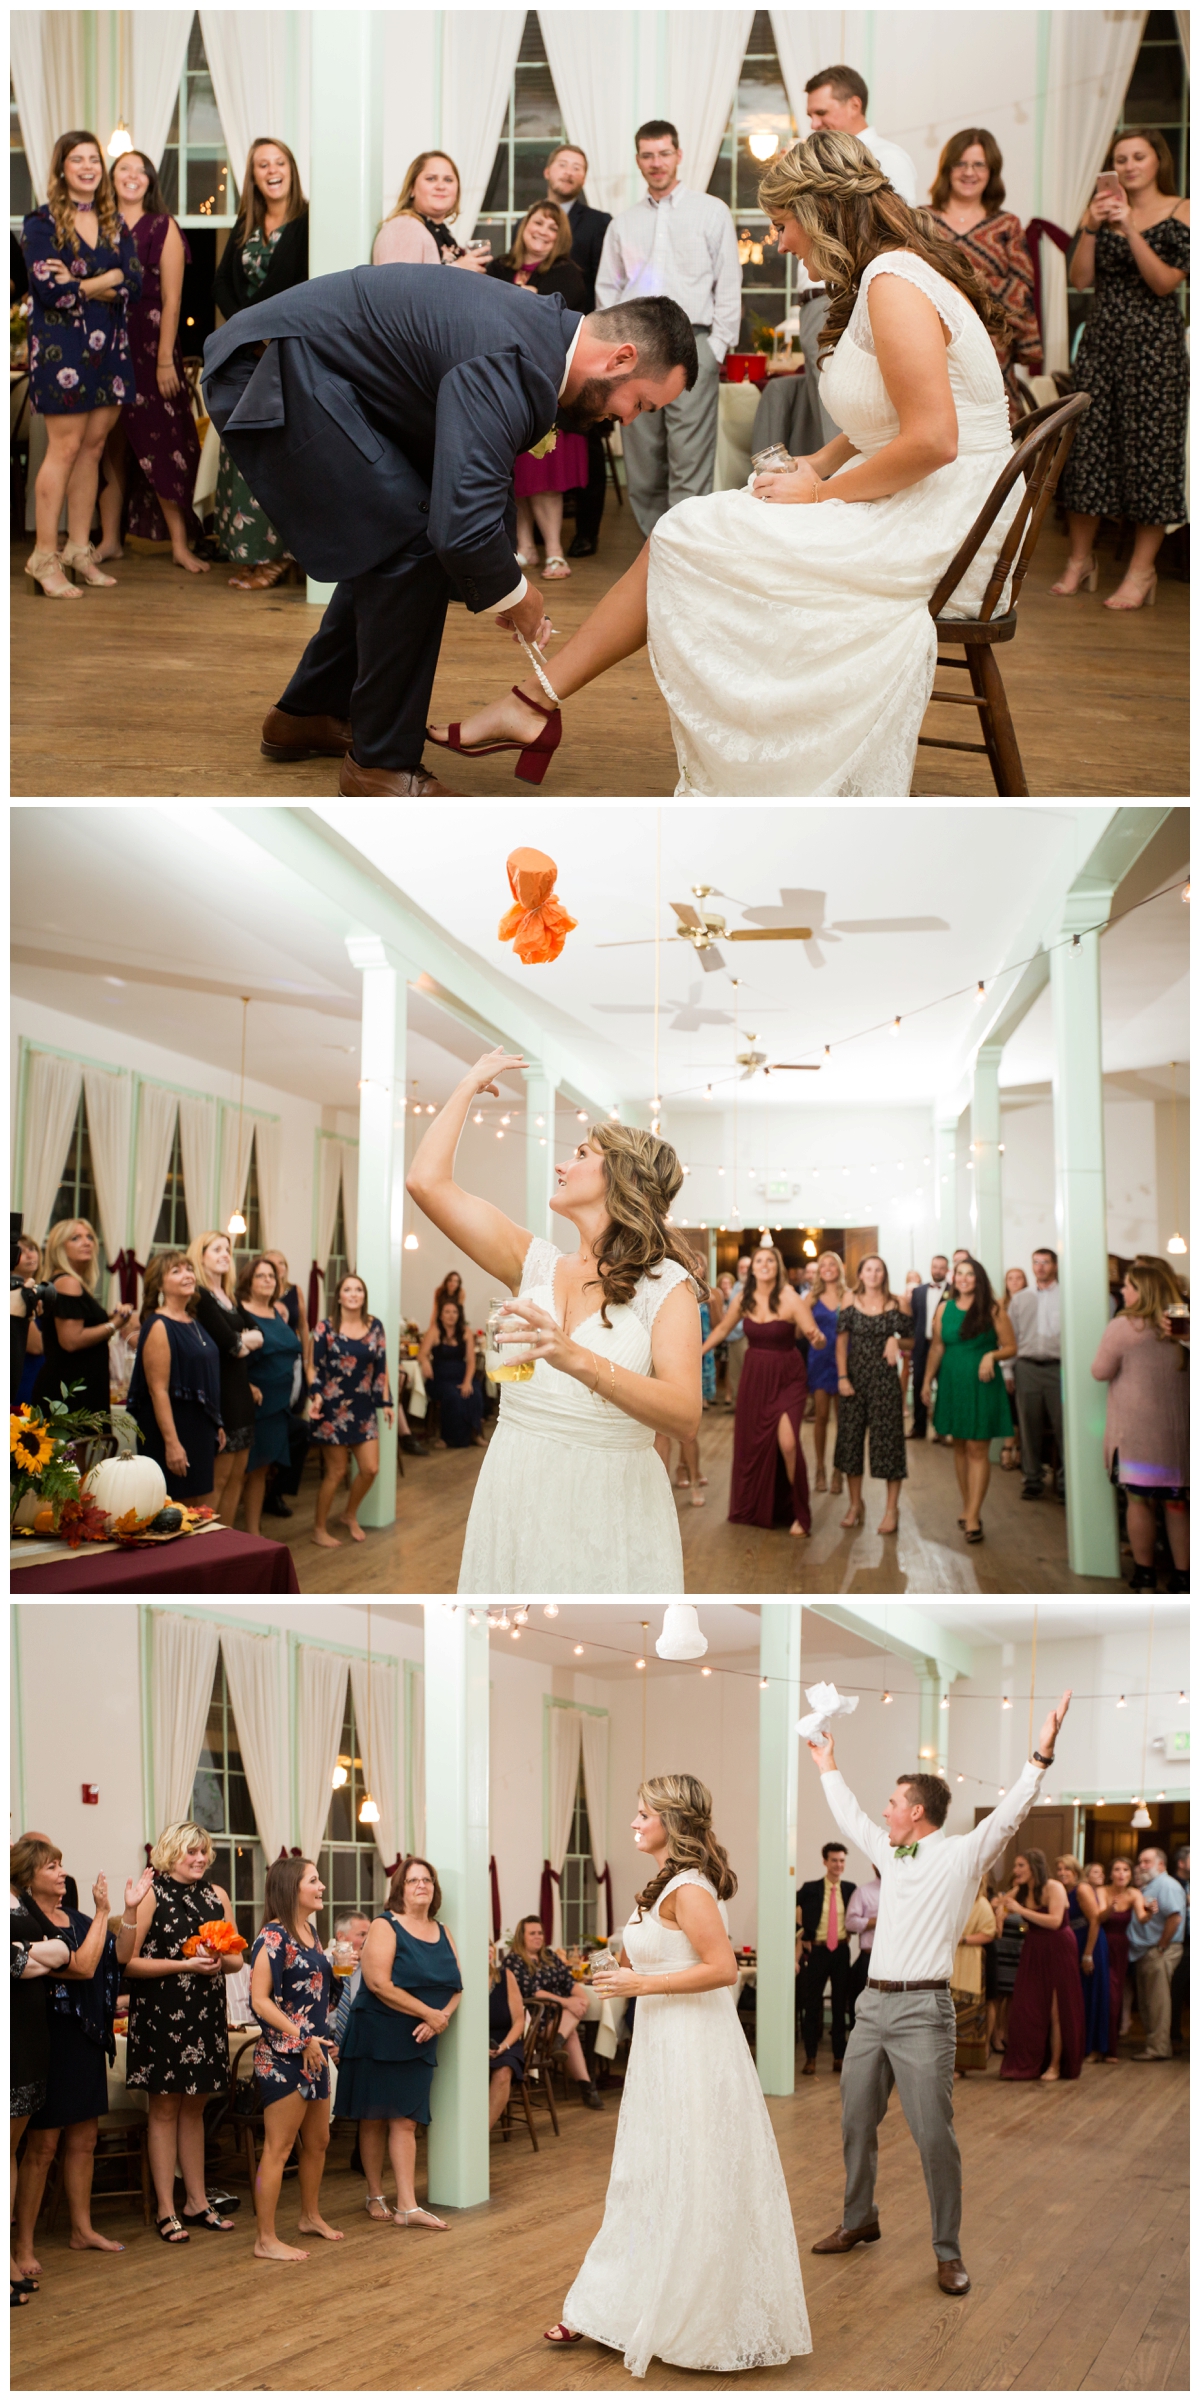 Unique bouquet toss using small whiskey bottles instead of flowers.